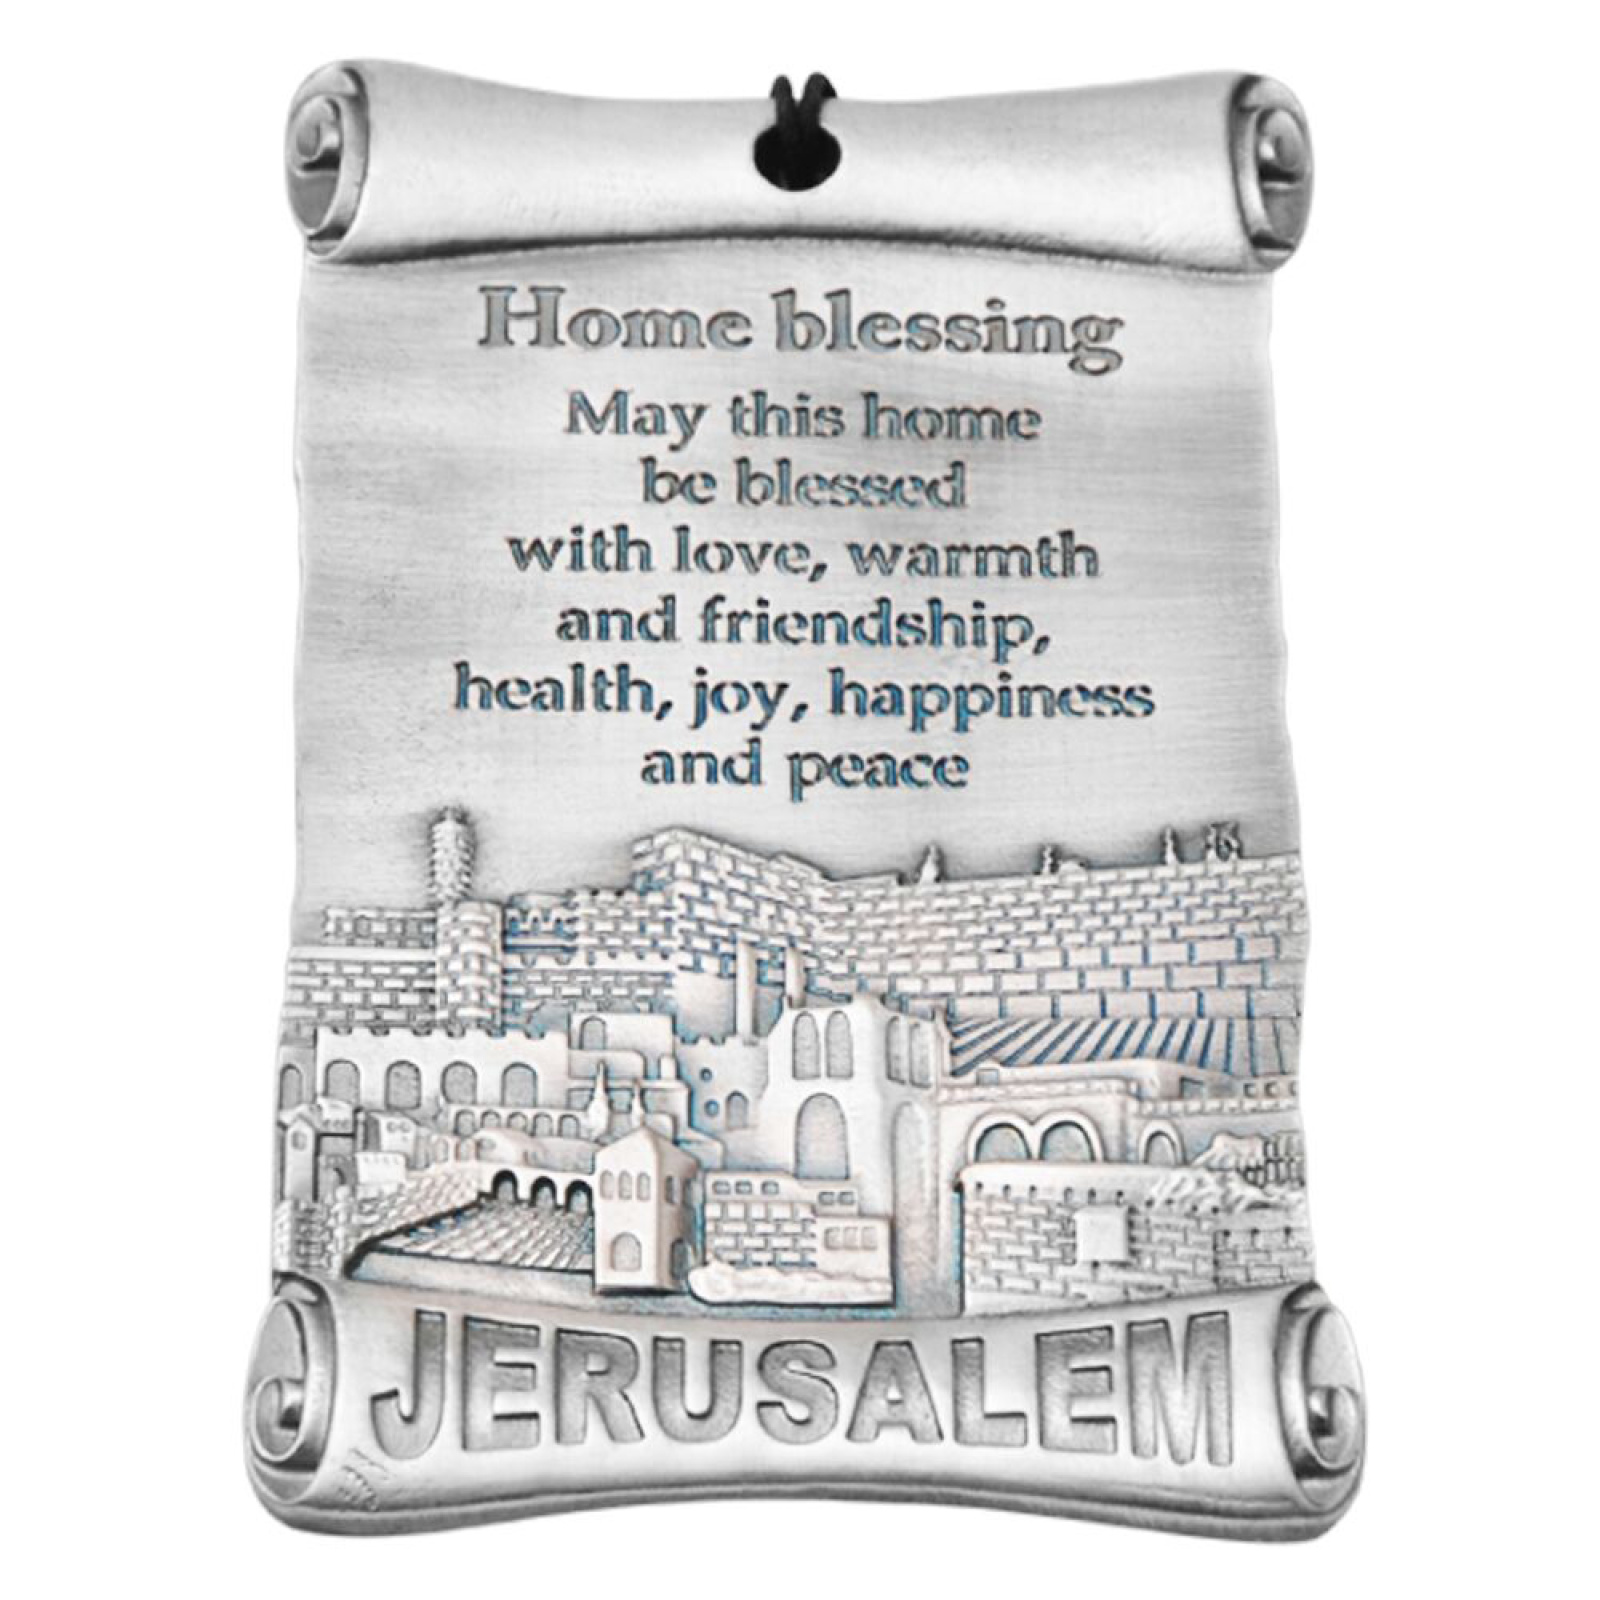 Home blessing metal wall plaque